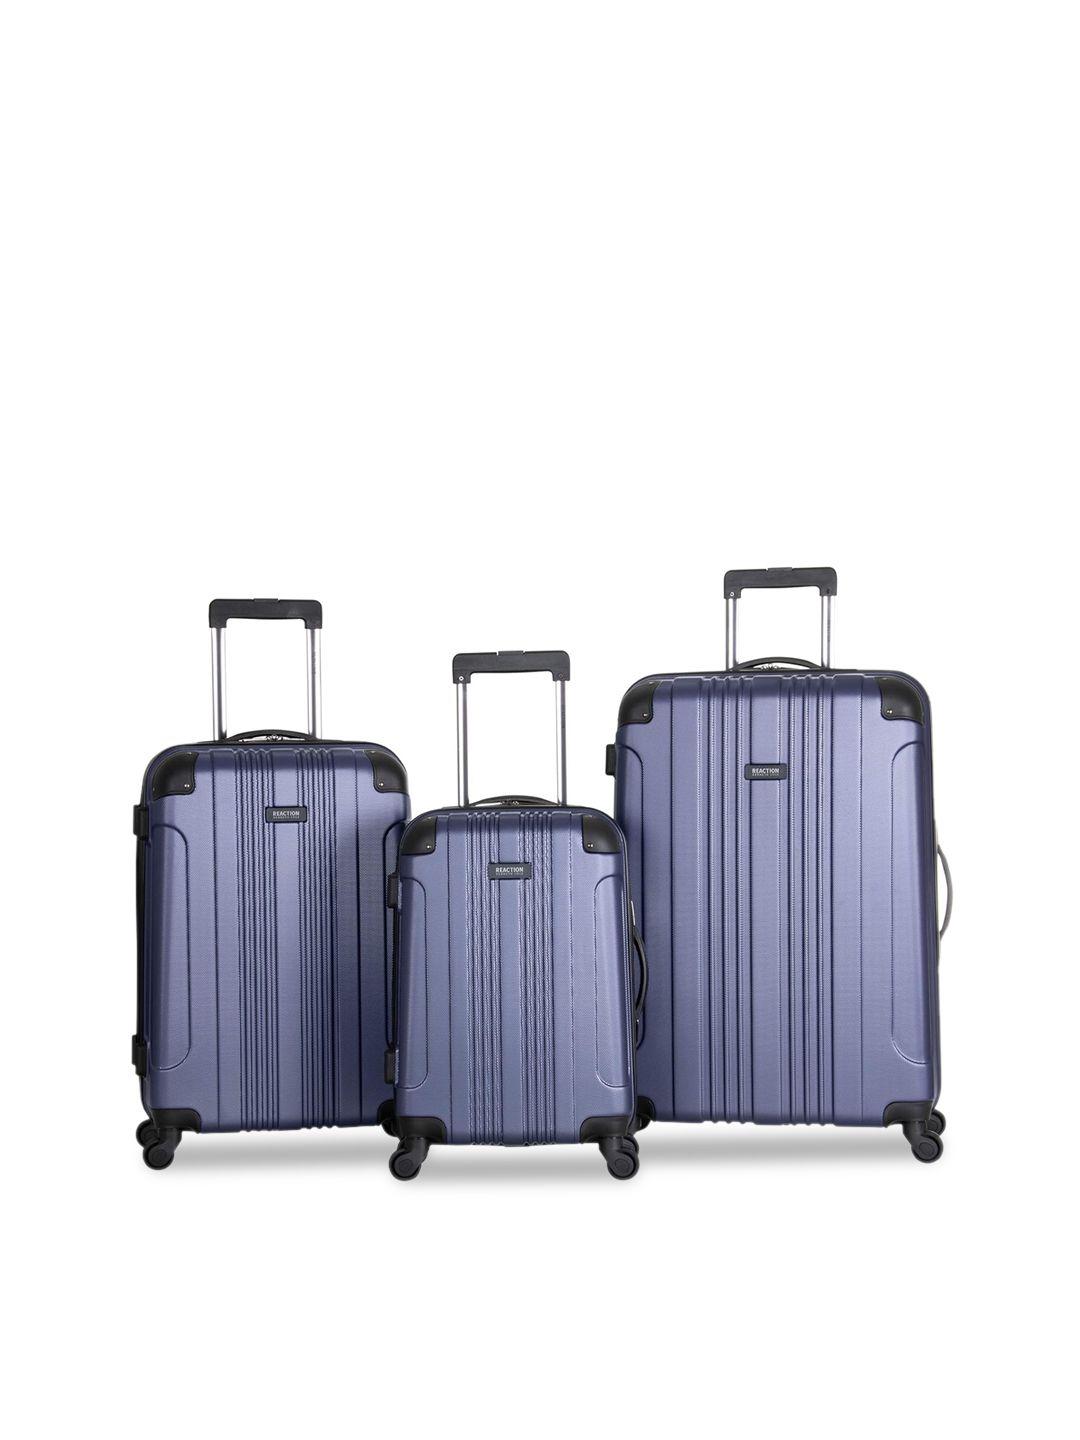 kenneth cole pack of  3 hard side trolley bag 20", 24", and 28"